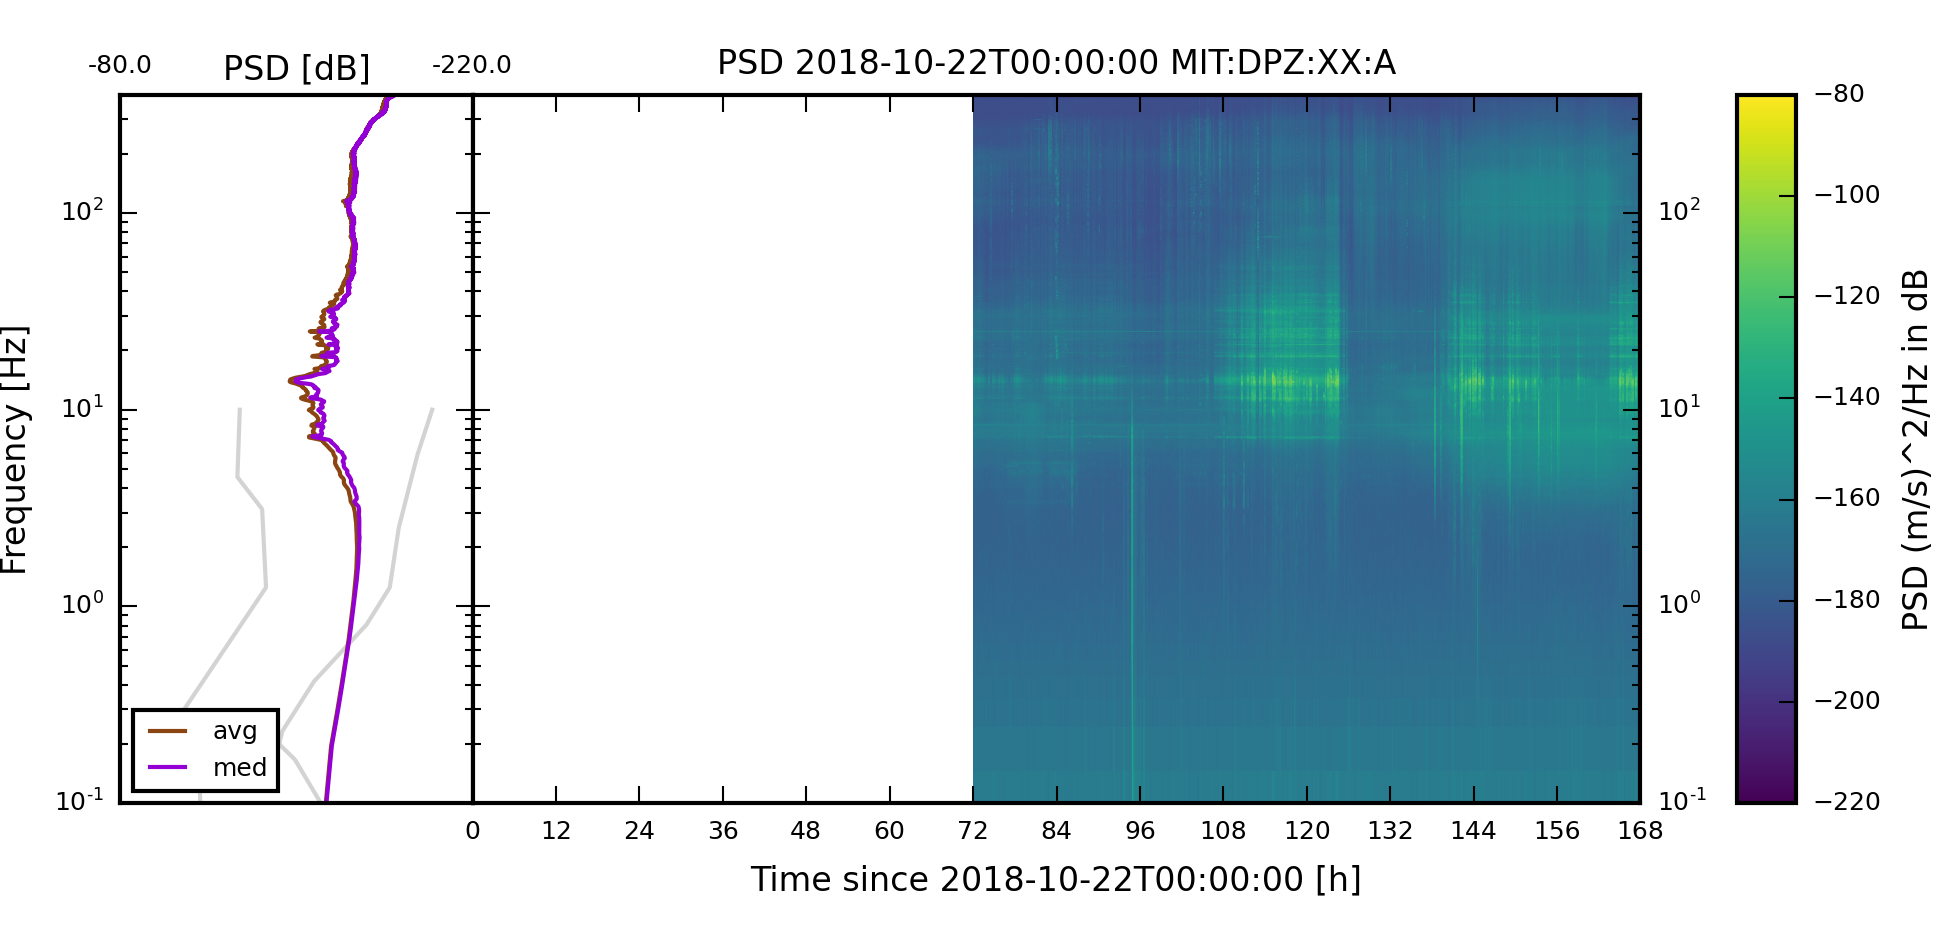 The weekly spectrogram of component XX:MIT:A:DPZ starting on 2018-10-22.